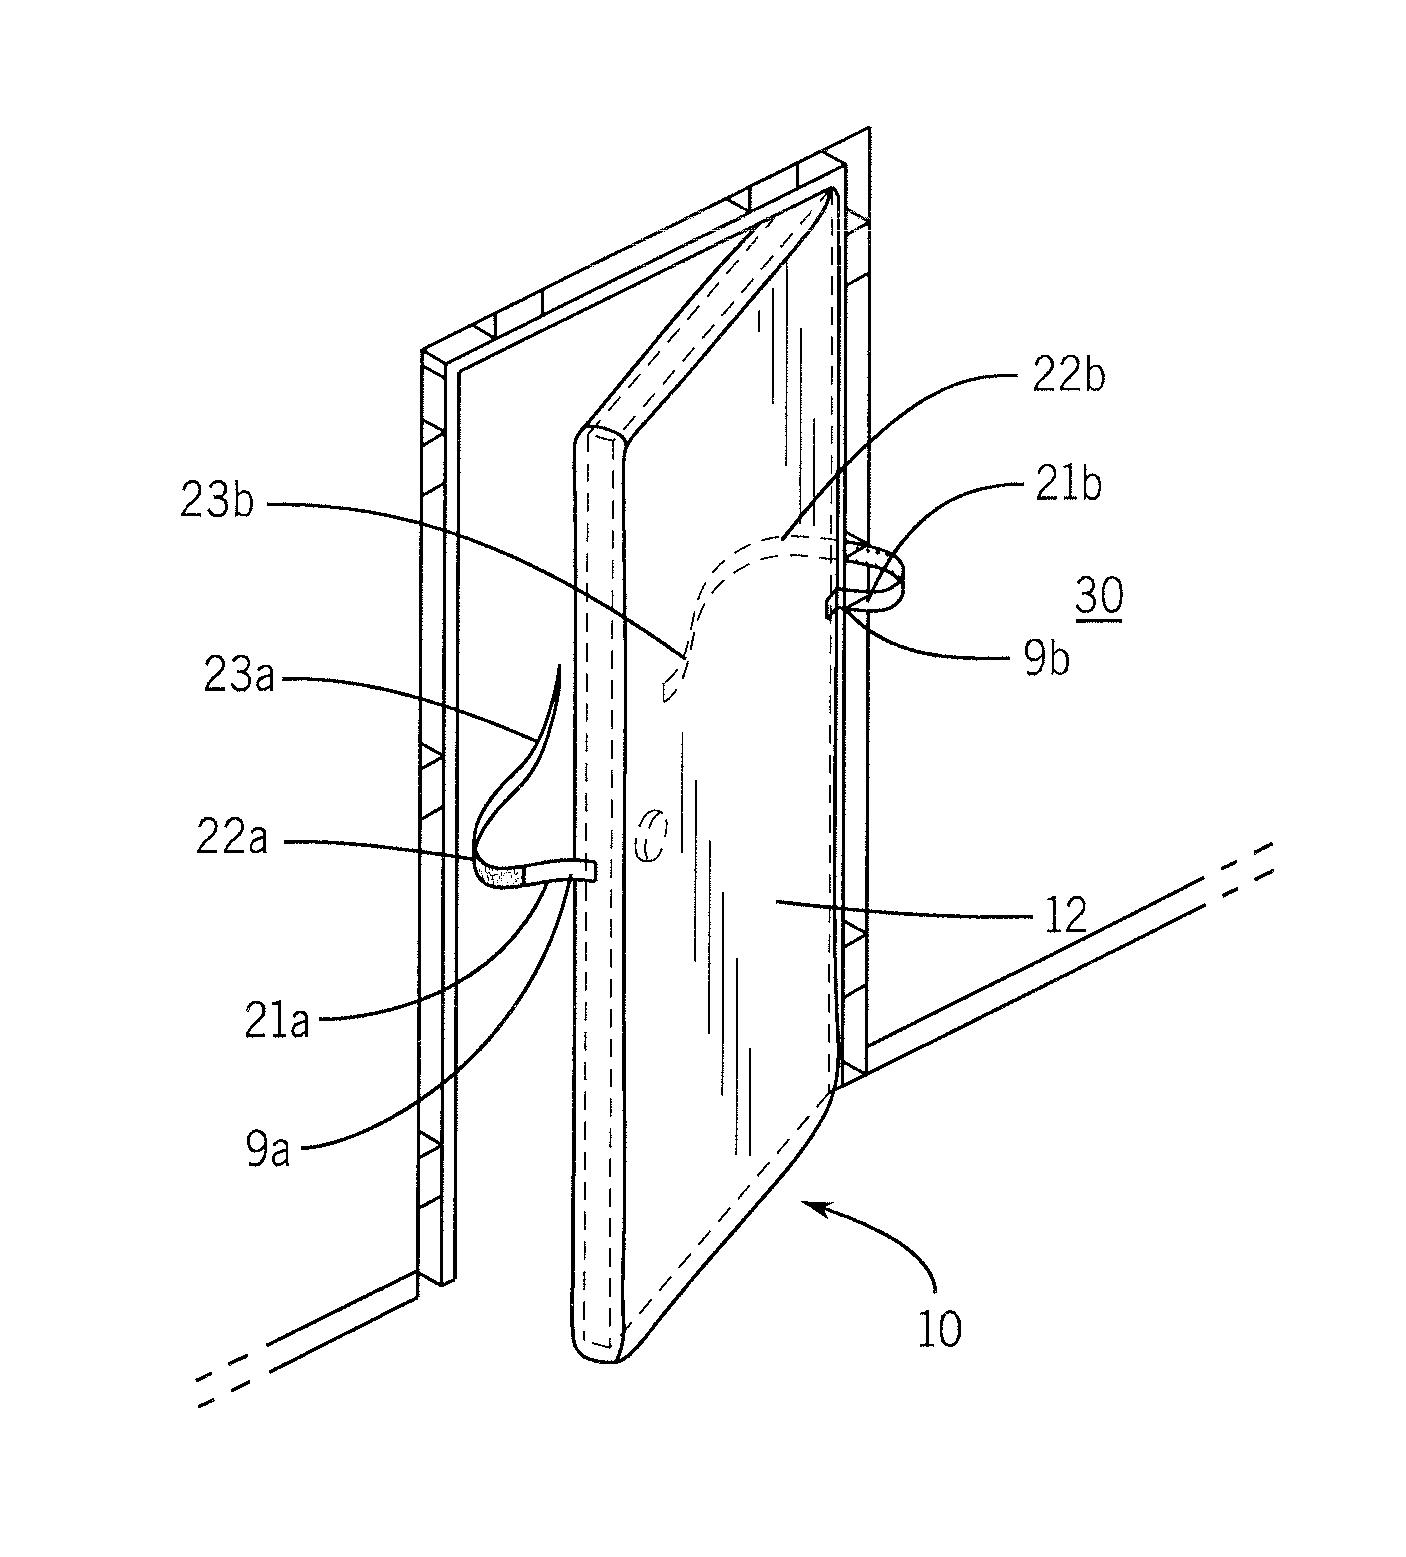 Reusable door covering device and method